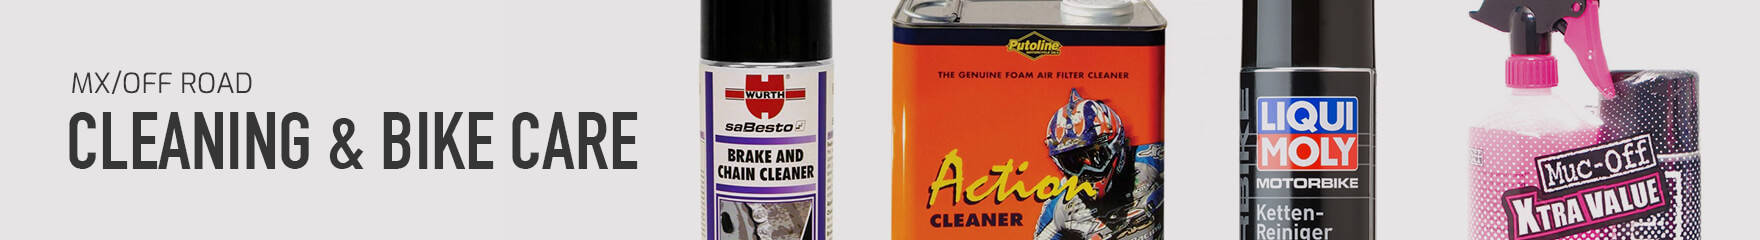 MX/Off Road Cleaning & Bike Care